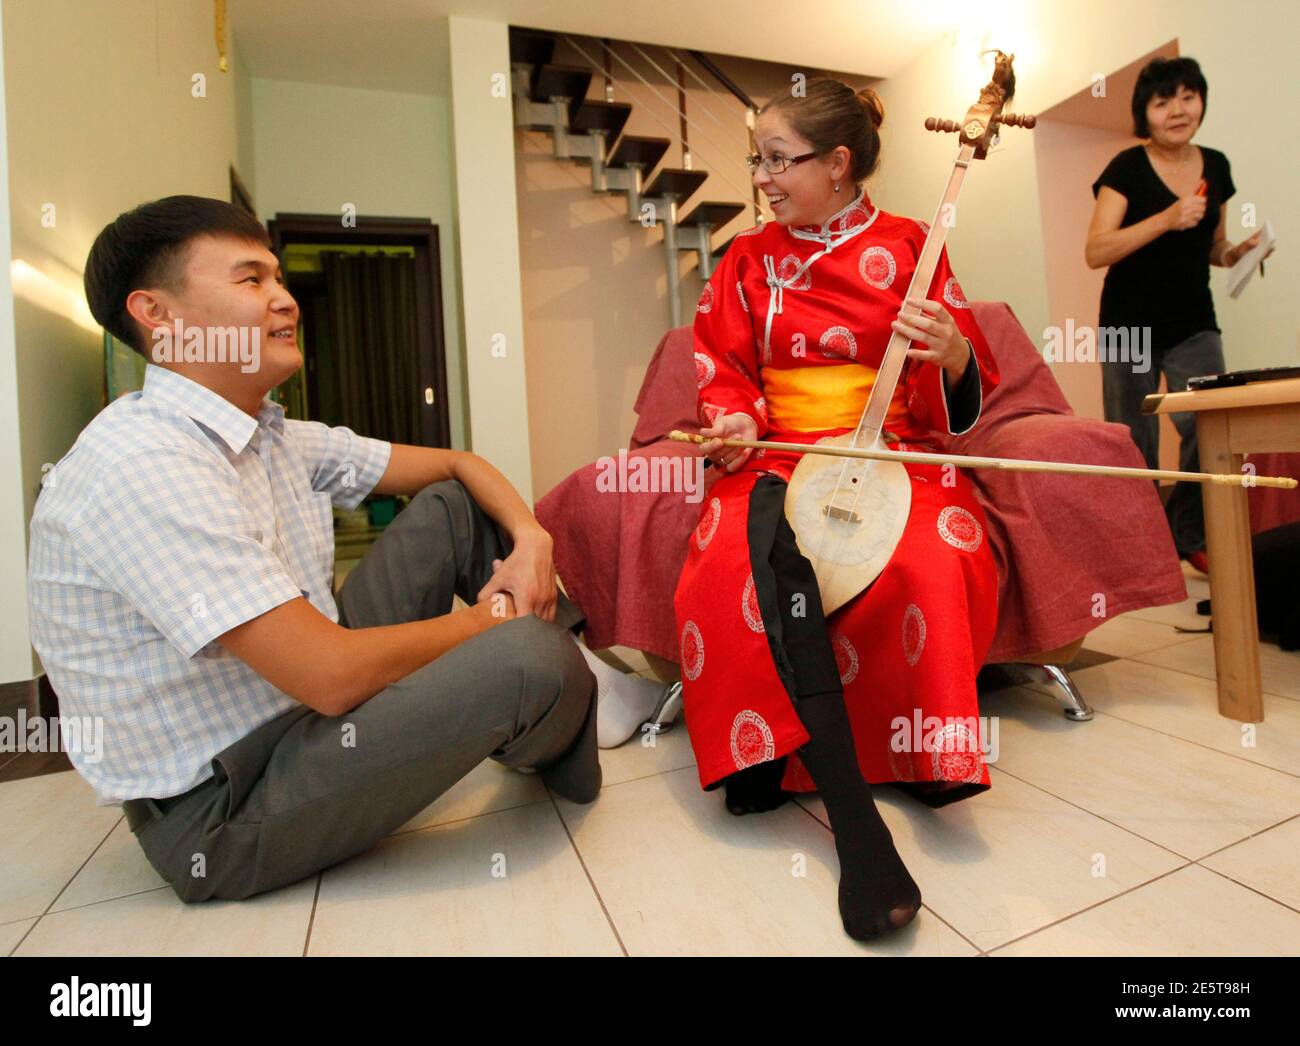 Australian citizen Elizabeth Gordon (C), dressed in a Tuvan national costume, plays the Tuvan ethnic musical instrument called Igil inside the house of local Saryglar family, where Elizabeth lives, in the Kyzyl town, the administrative centre of Russia's Tuva region, some 800 km (497 miles) south of the Siberian city of Krasnoyarsk, September 12, 2011. Elizabeth from the state of Queensland, Australia, arrived in the Siberian region of Tuva in April, 2010 to study the Russian and Tuvan languages, the culture, traditions and music of the Tuvans, one of the native peoples of Siberia. The enthusi Stock Photo